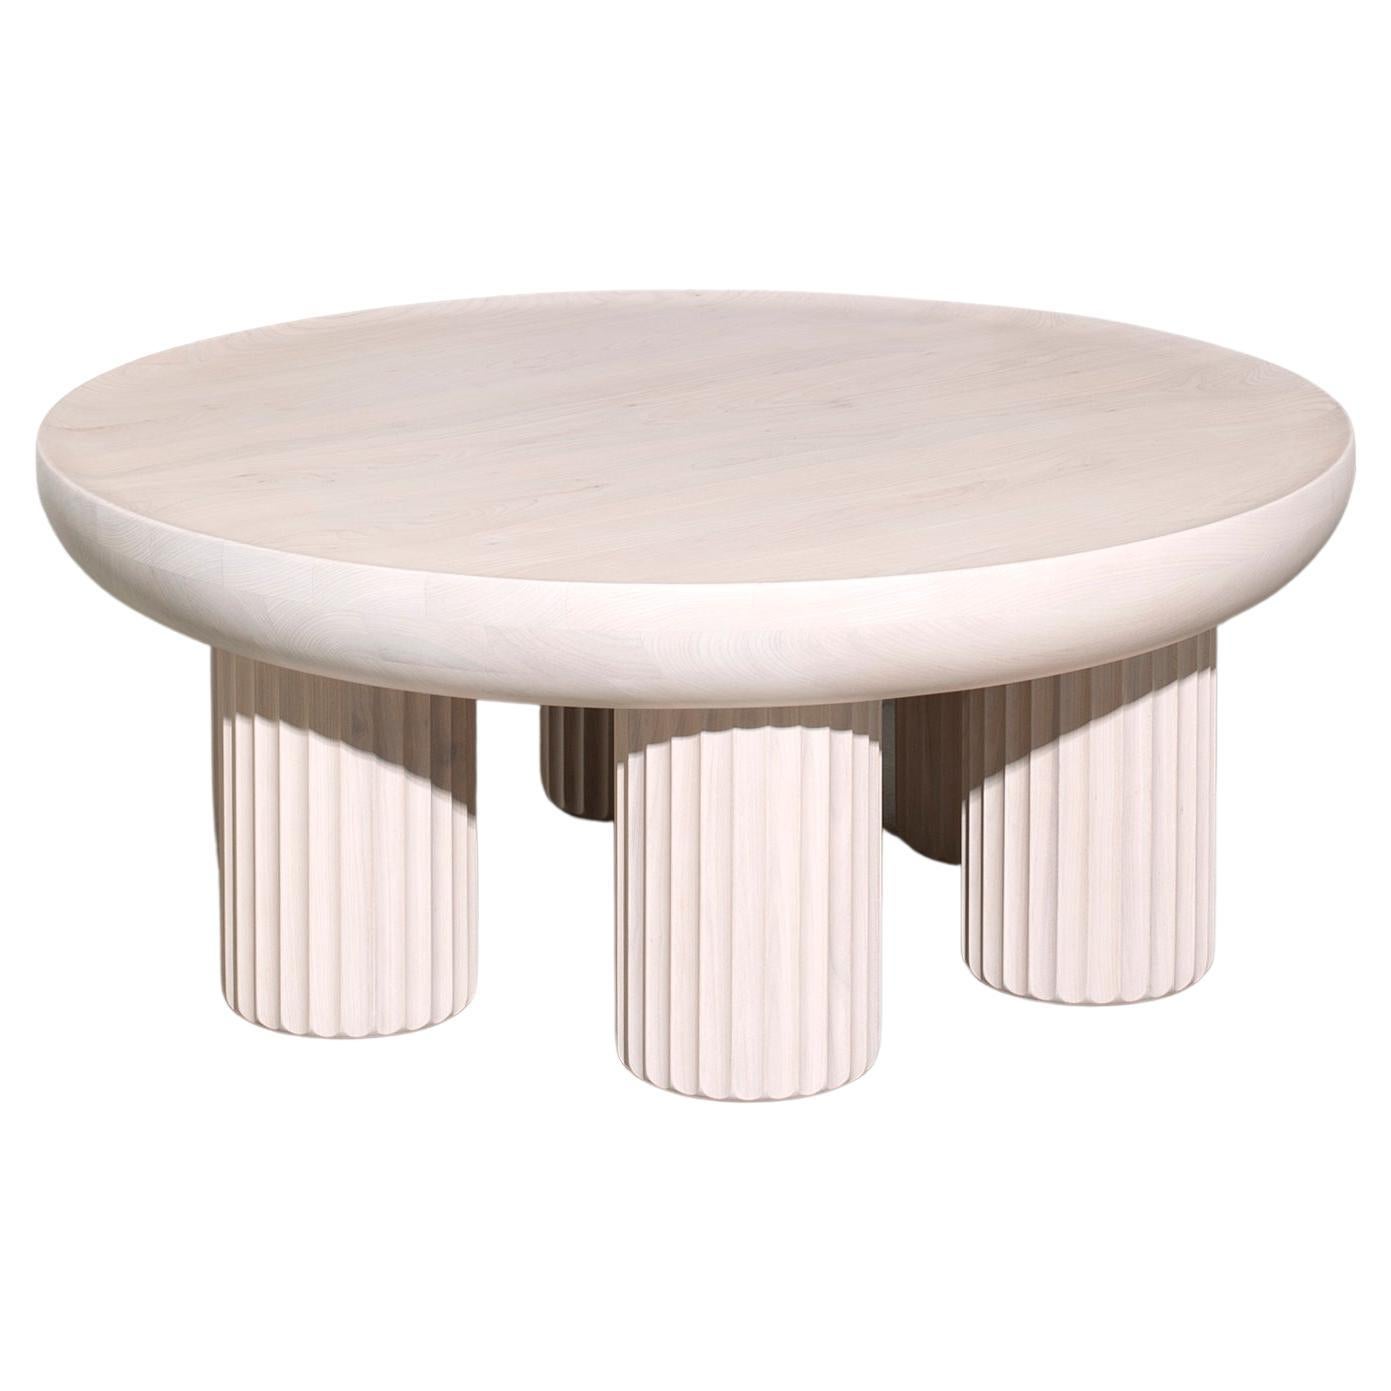 Kalokagathos Low Table, Hand-Crafted, Made of Solid Ash Wood in Natural Finish For Sale